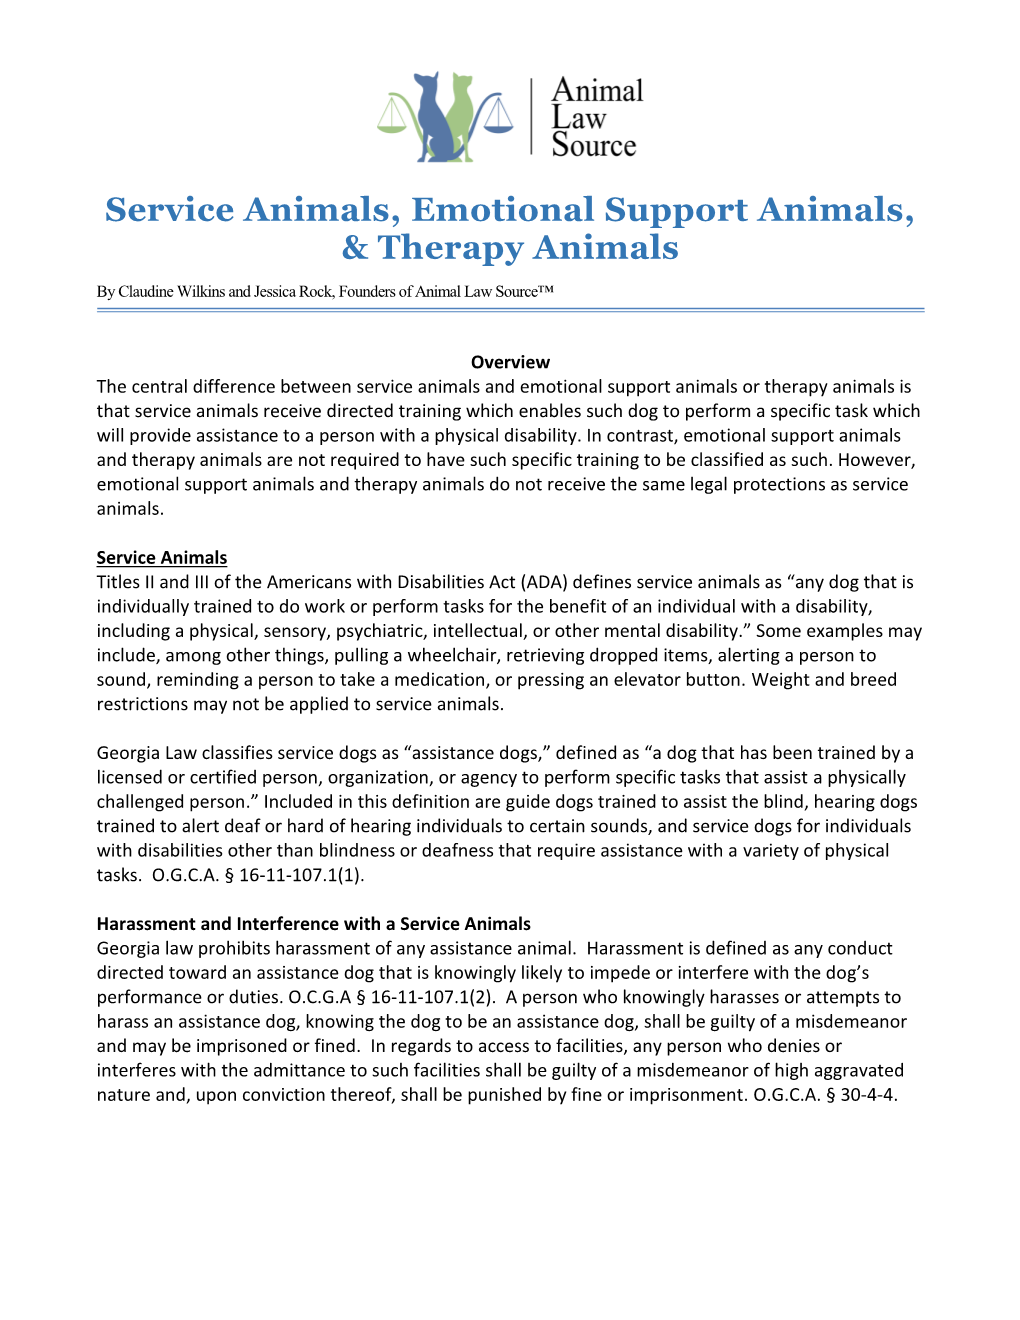 Service Animals, Emotional Support Animals, & Therapy Animals